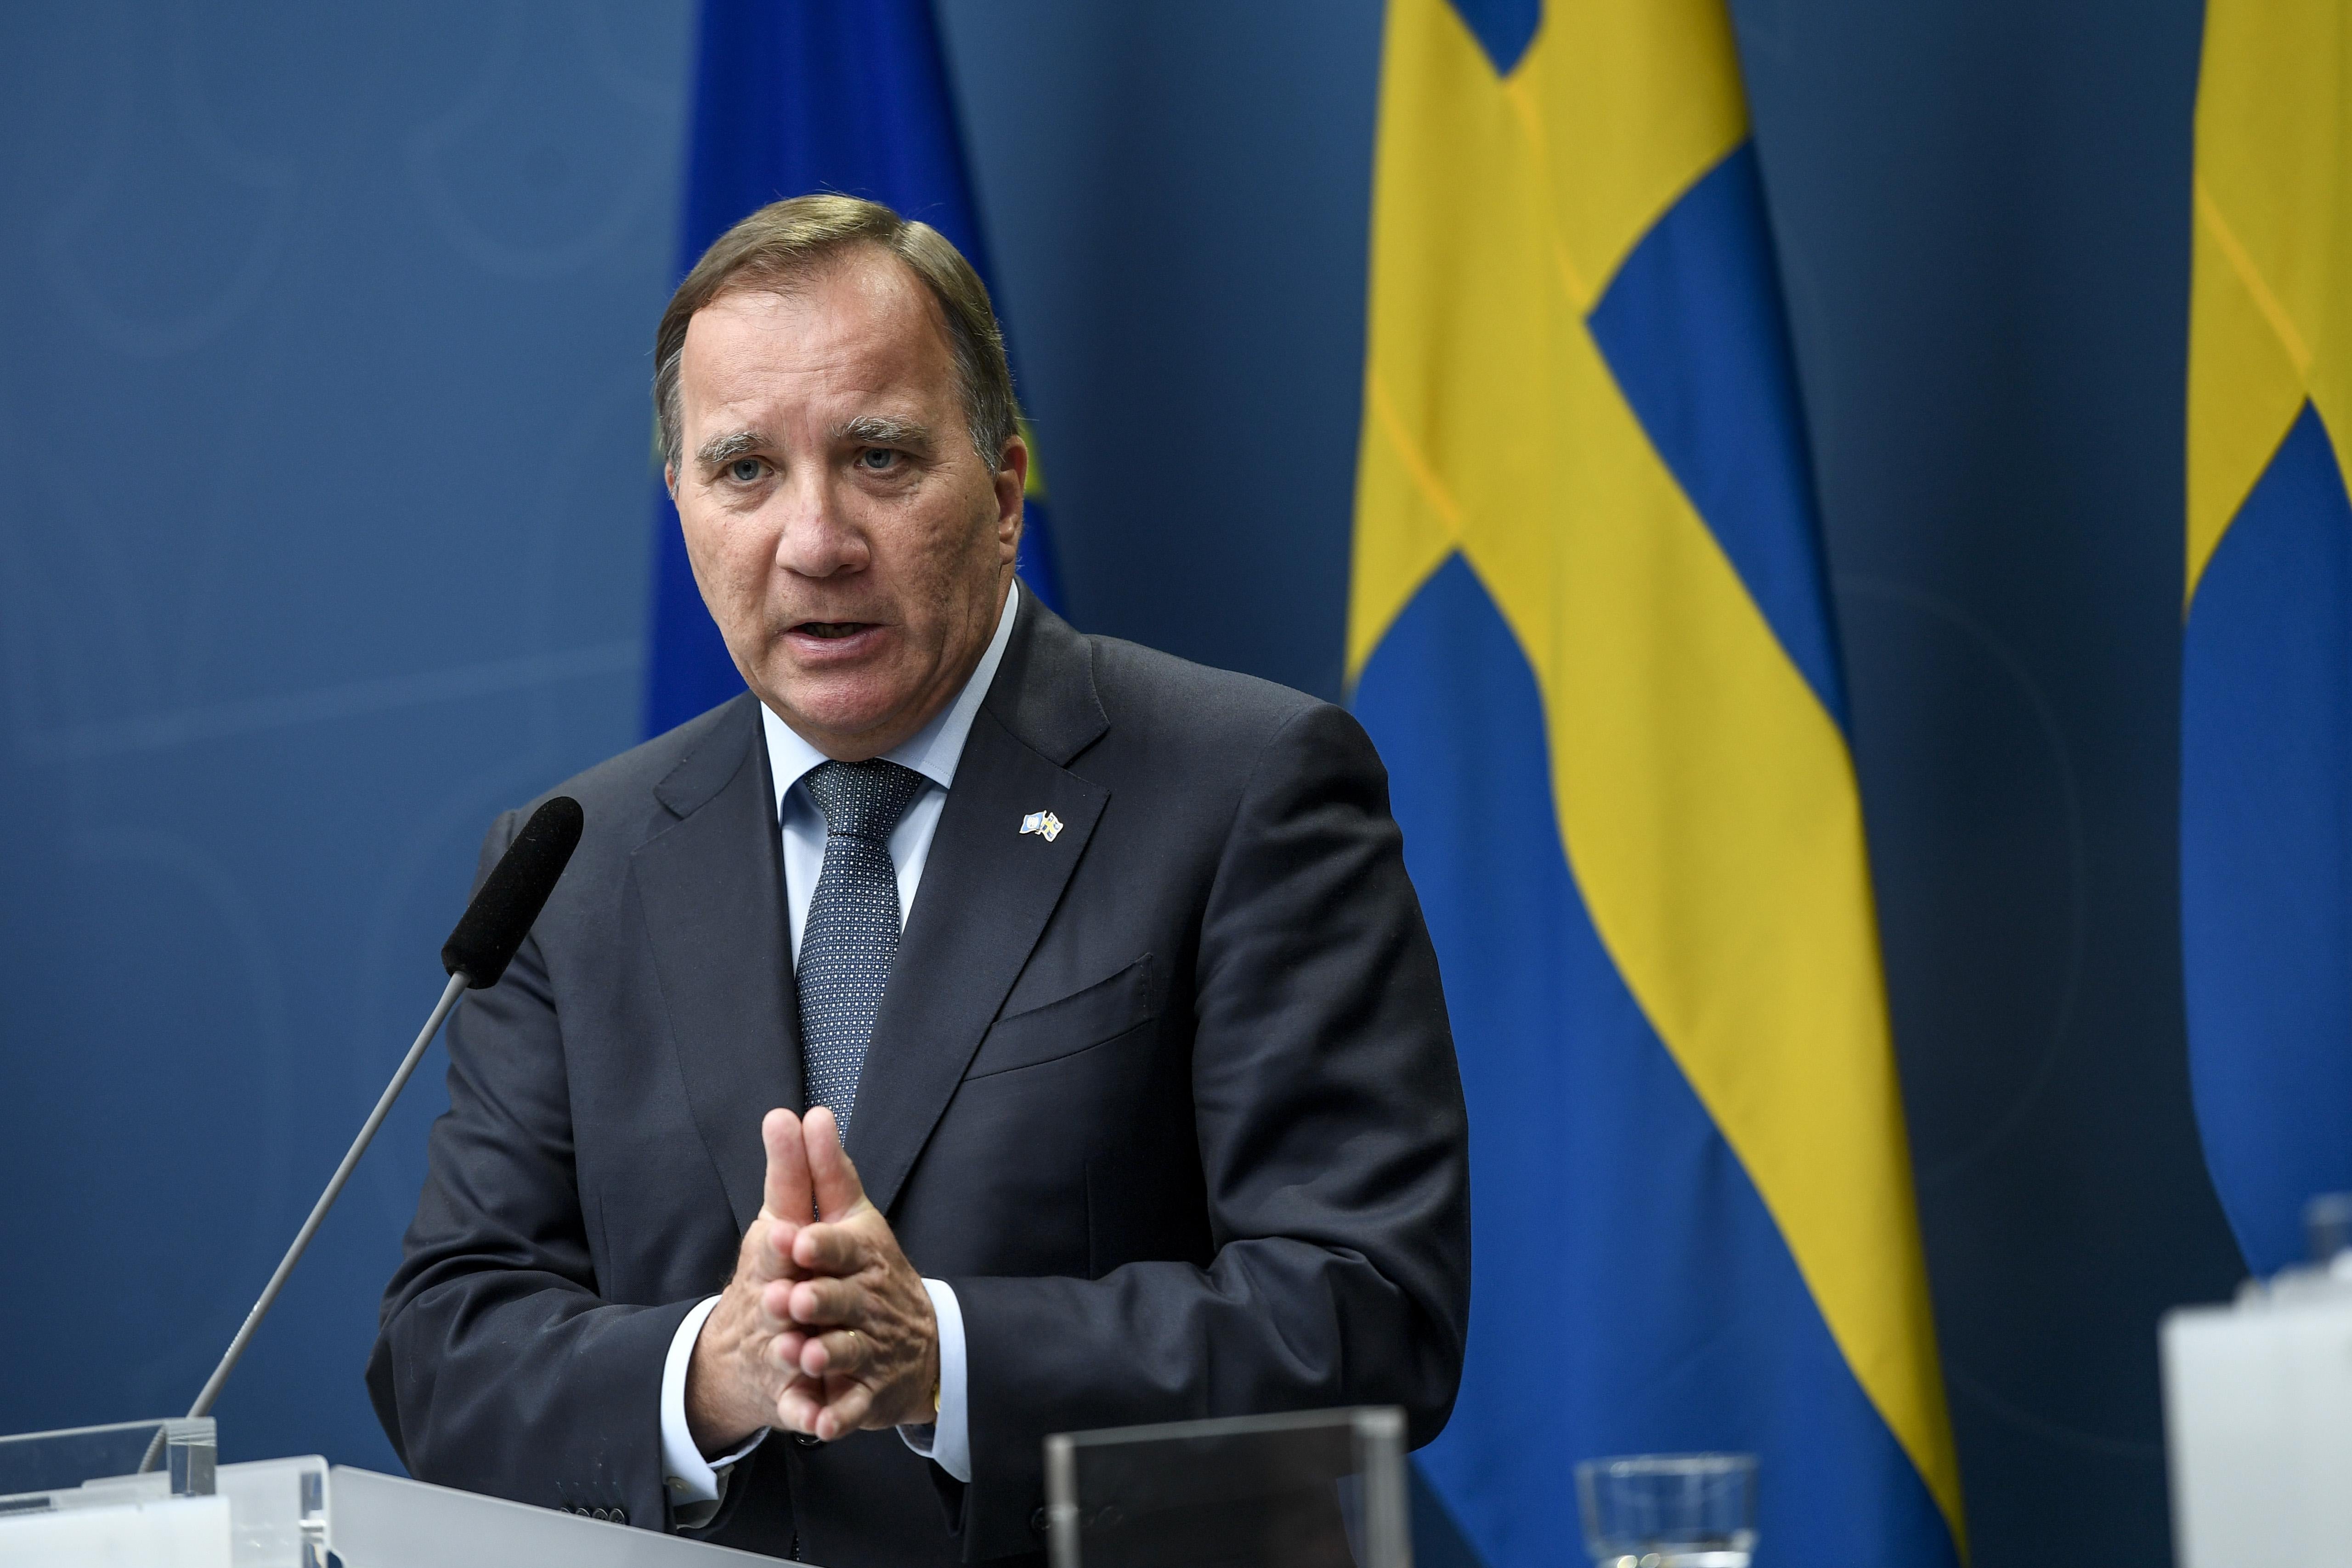 Stefan Löfven stands in front of a Swedish flag and speaks into a microphone while folding his hands.